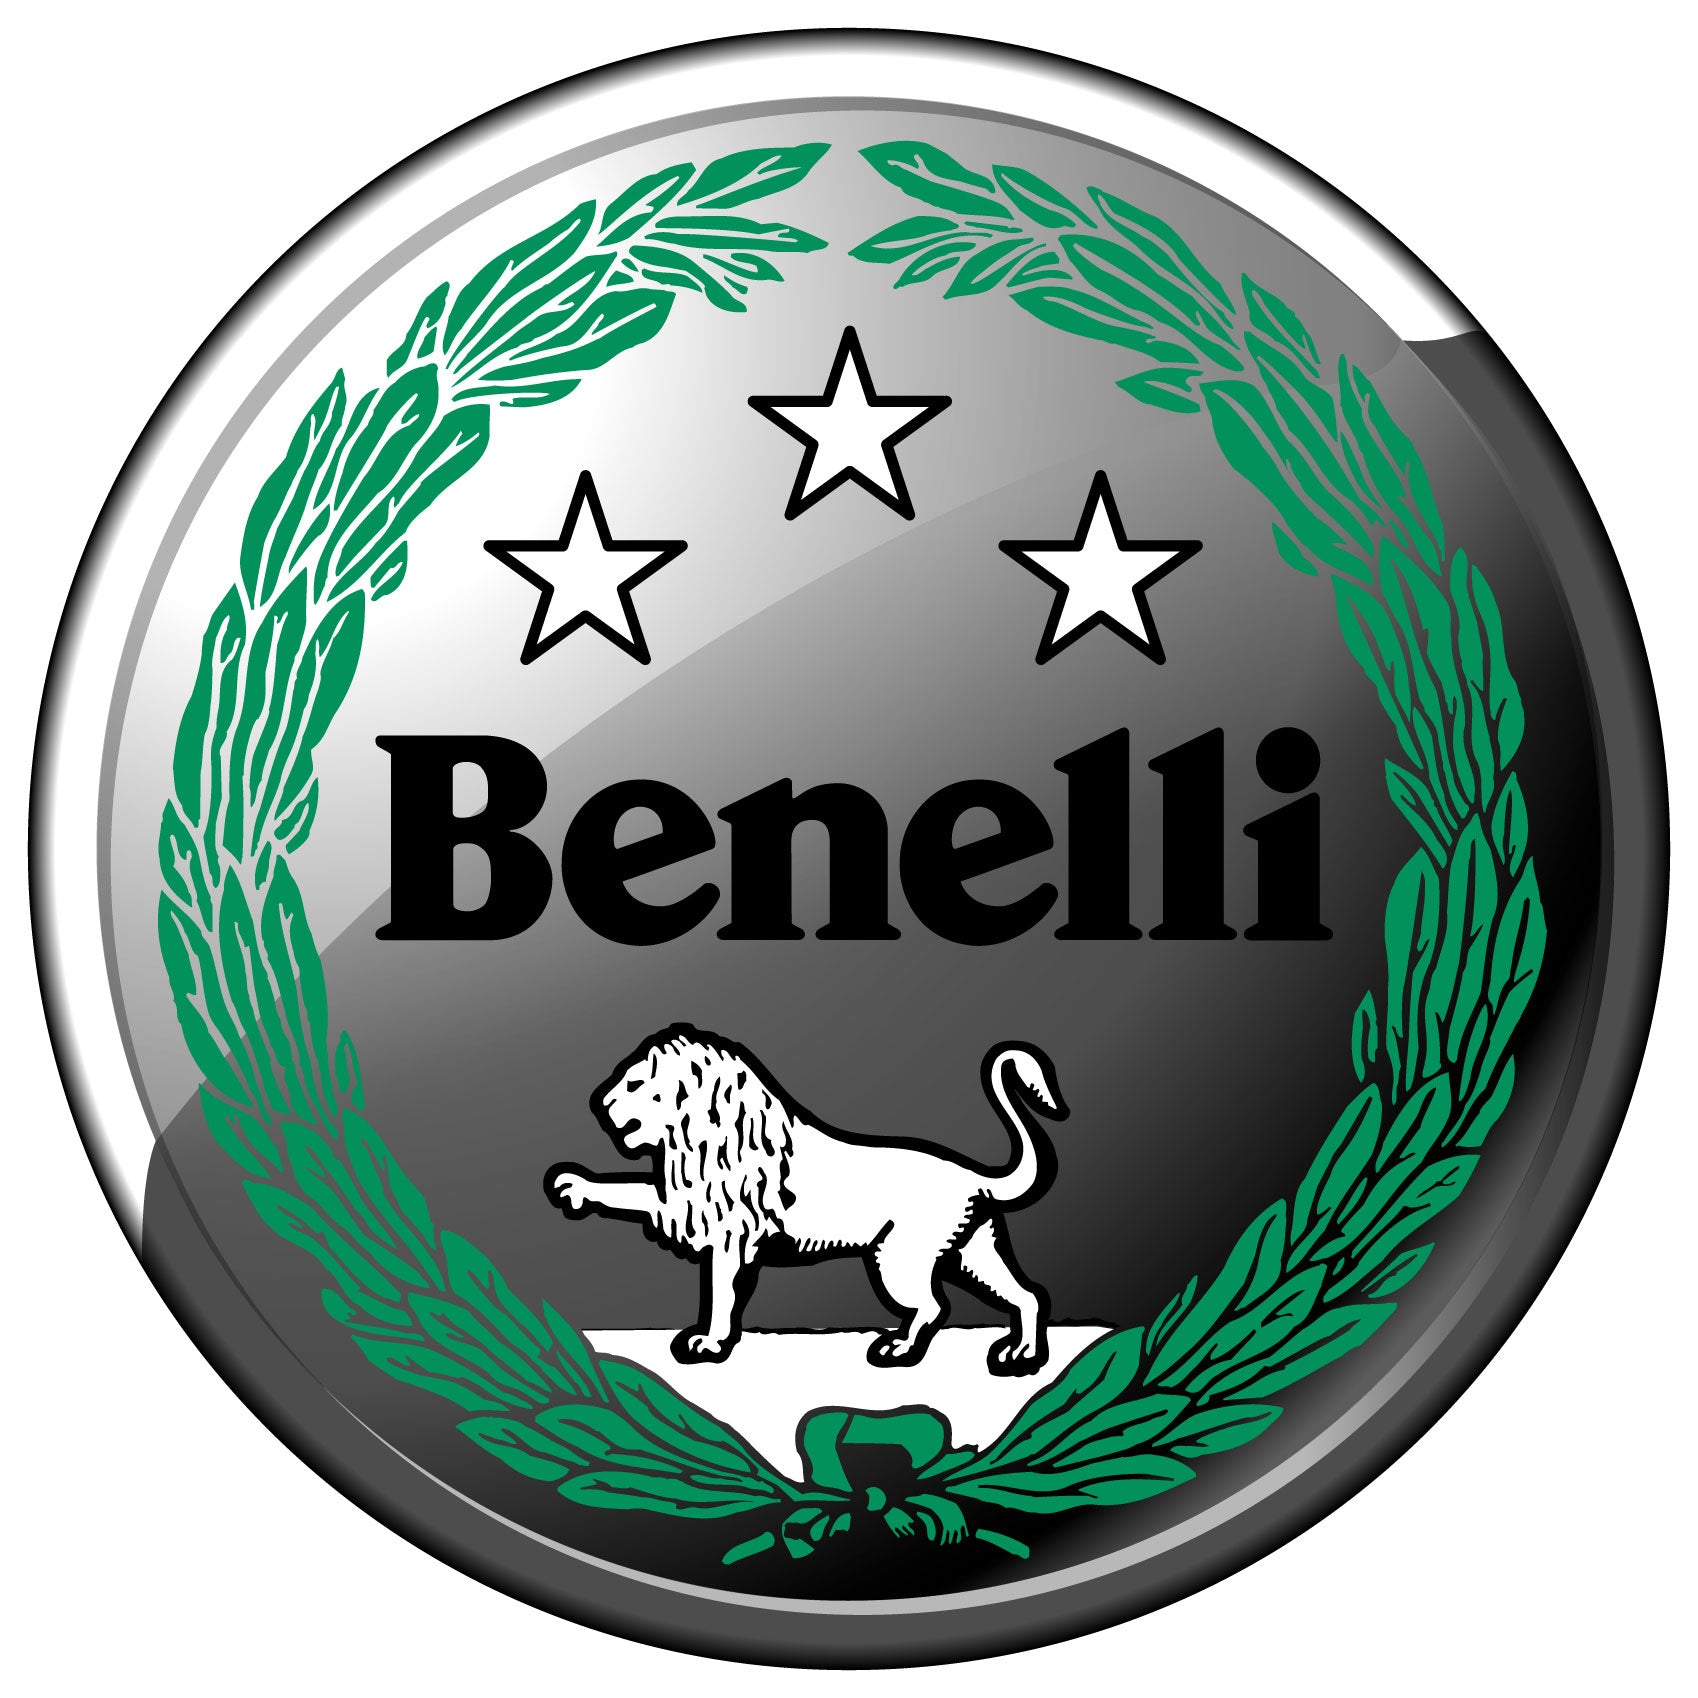 Benelli OEM O-Ring Oil Filter Cover TNT135 2020+ 169154320000